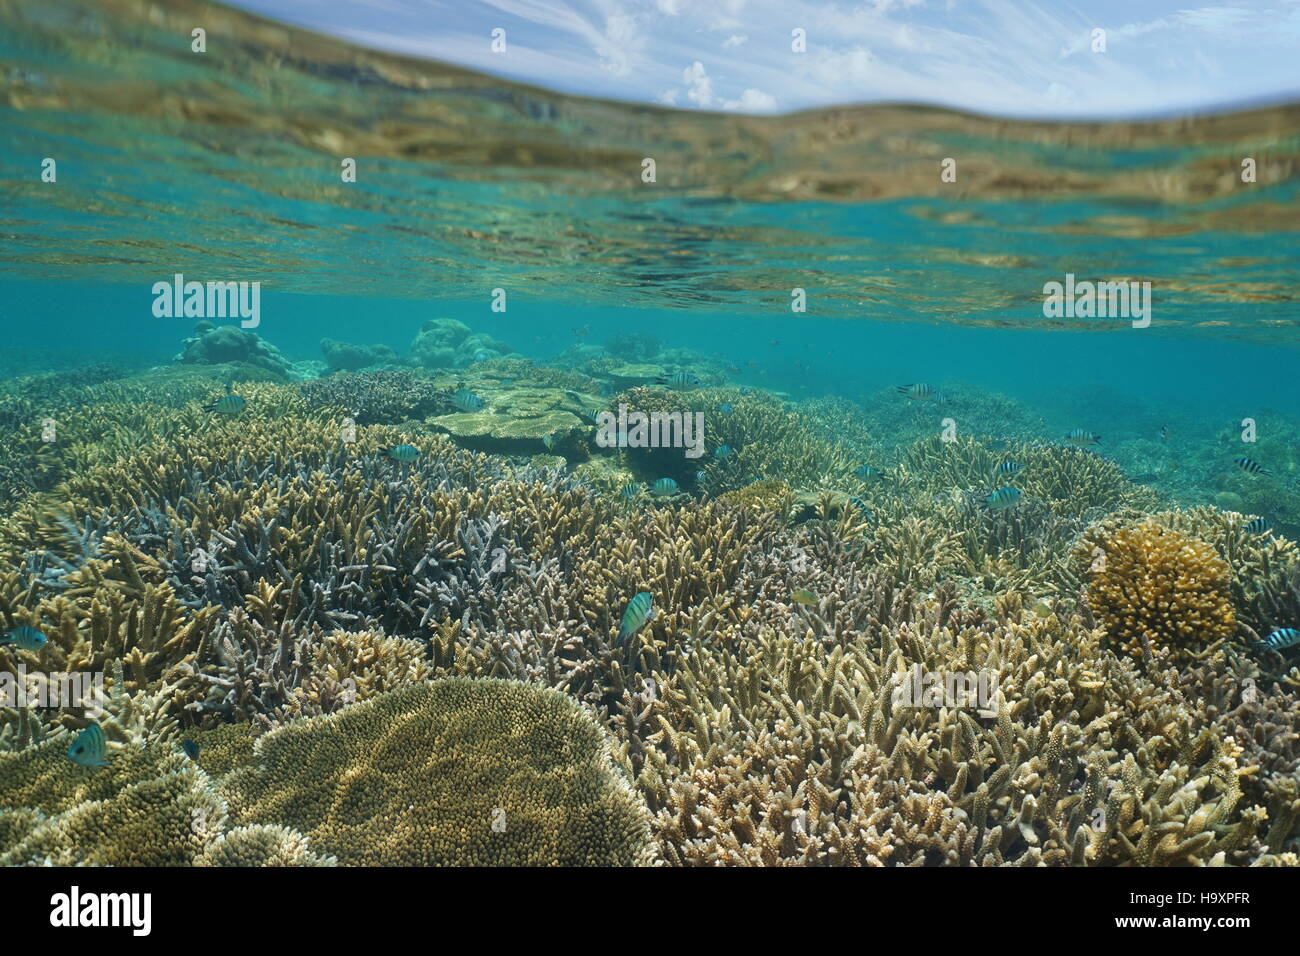 Shallow coral reef with fish underwater and sky with clouds above waterline, New Caledonia, south Pacific ocean Stock Photo